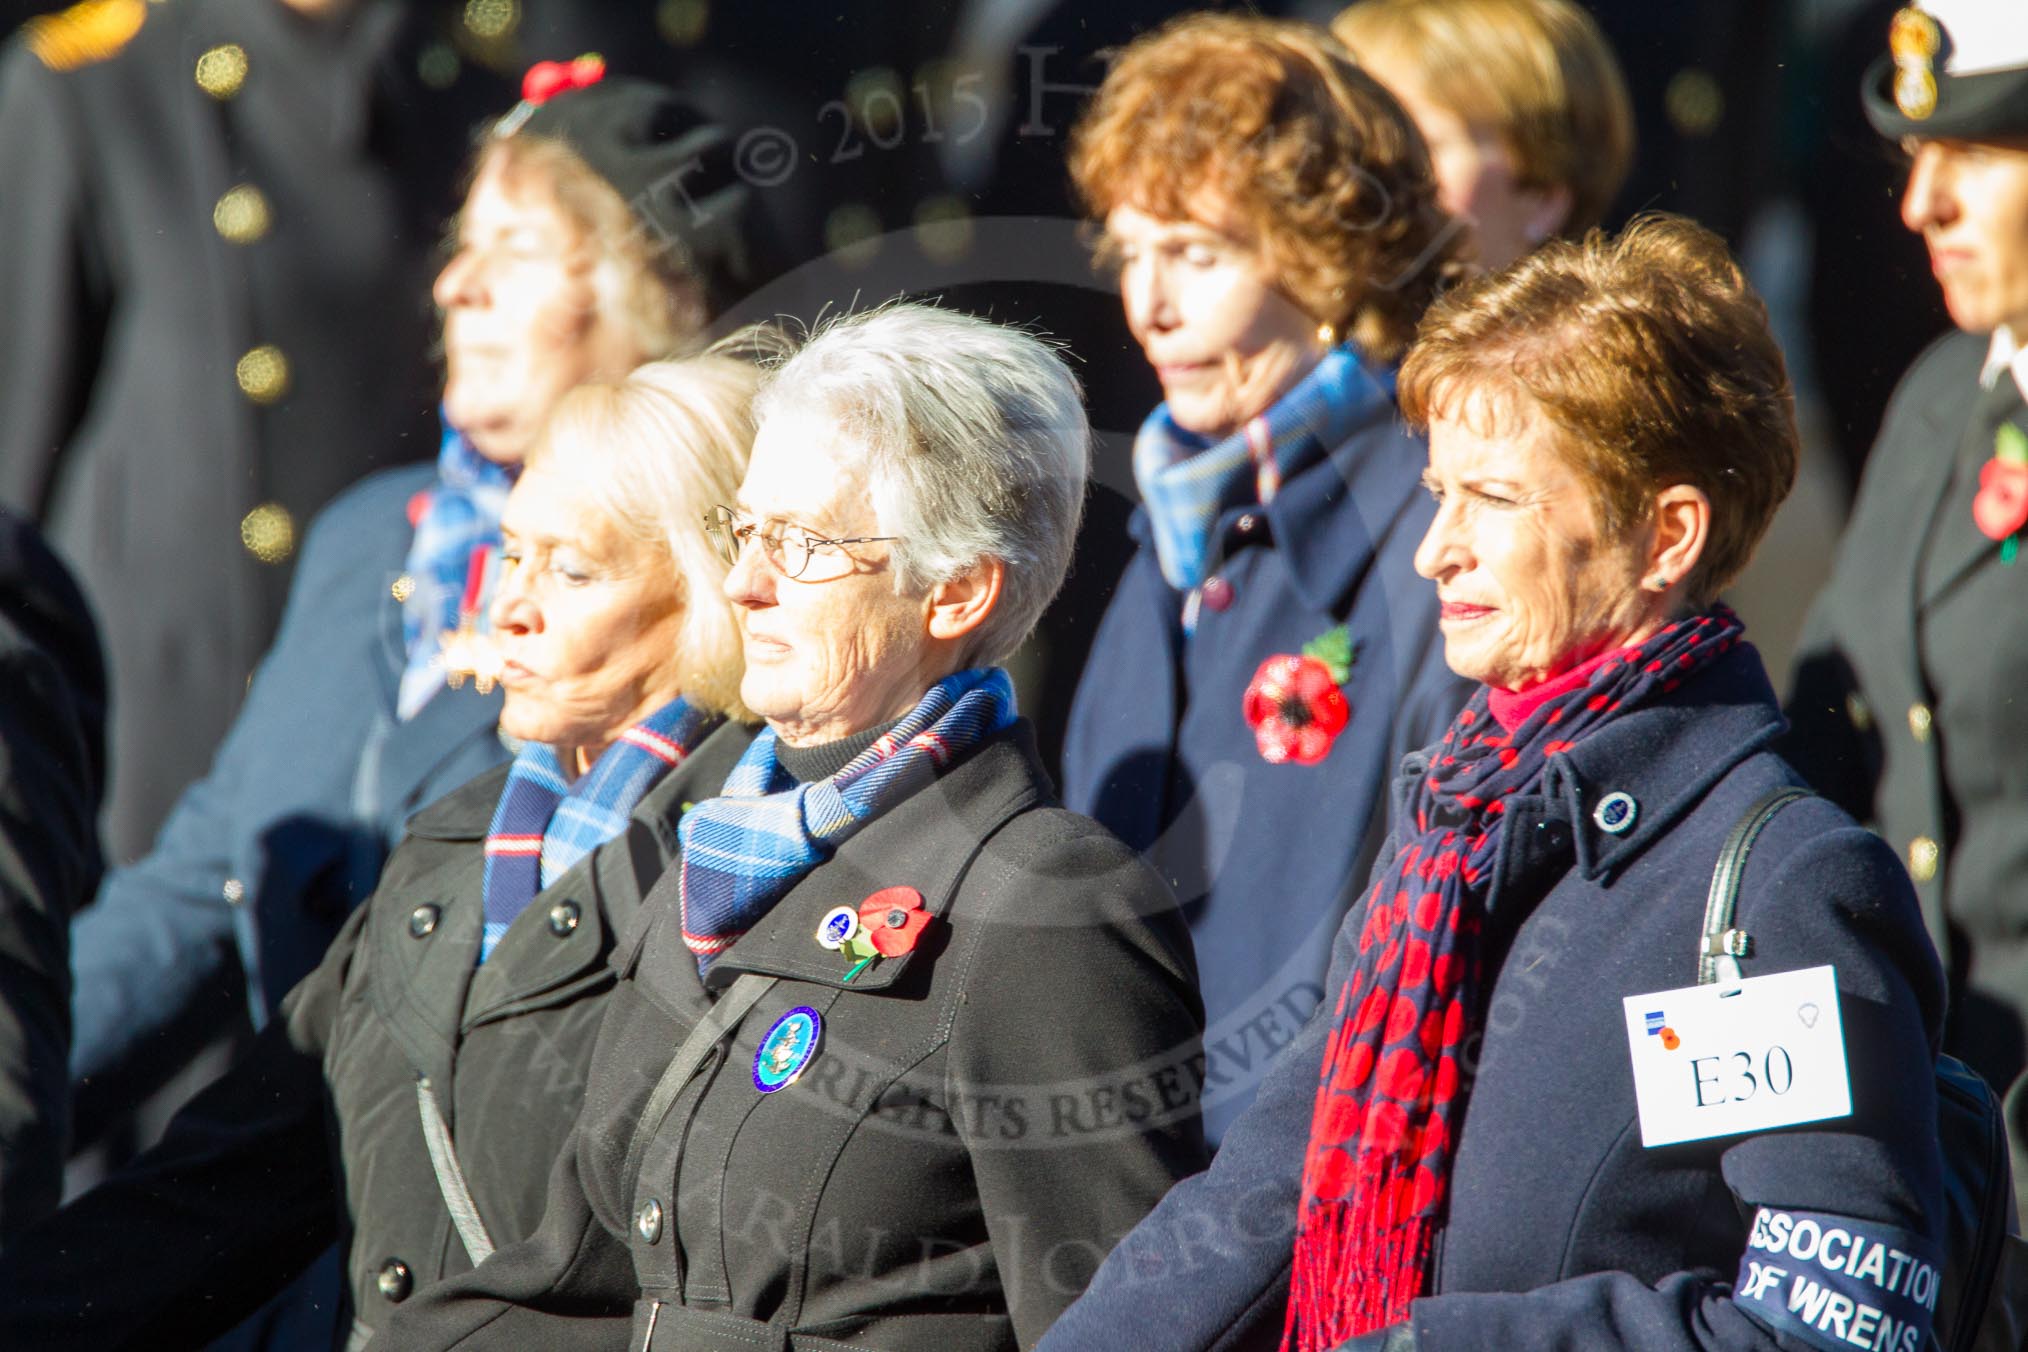 Remembrance Sunday Cenotaph March Past 2013: E30 - Association of WRENS..
Press stand opposite the Foreign Office building, Whitehall, London SW1,
London,
Greater London,
United Kingdom,
on 10 November 2013 at 11:47, image #595